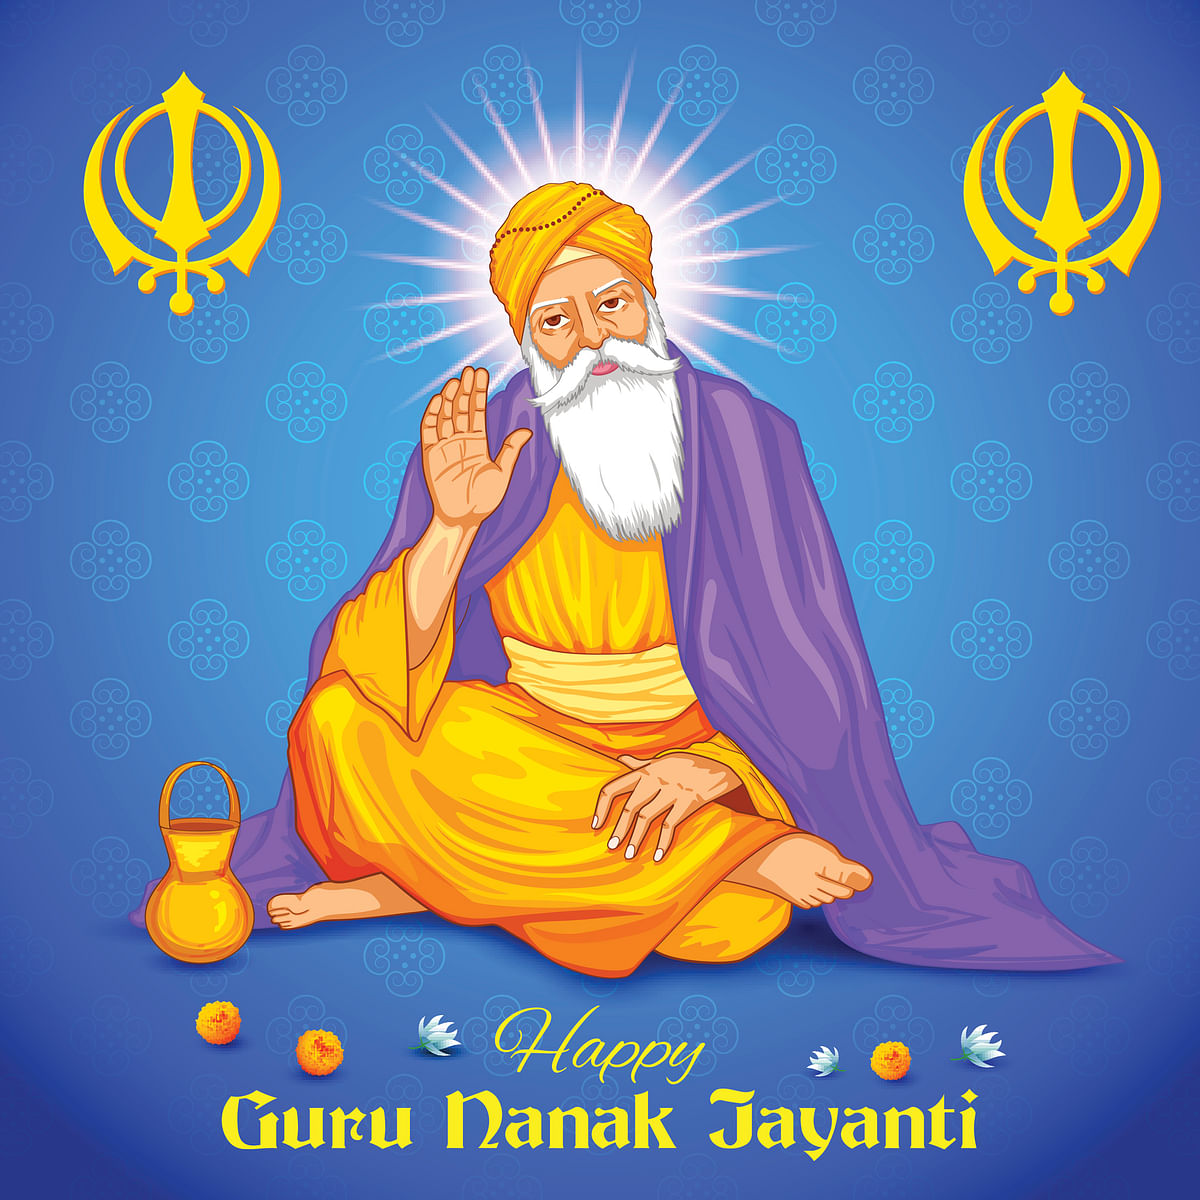 Here are some Guru Nanak Jayanti Wishes, Images, and messages which you can send to you loved ones.